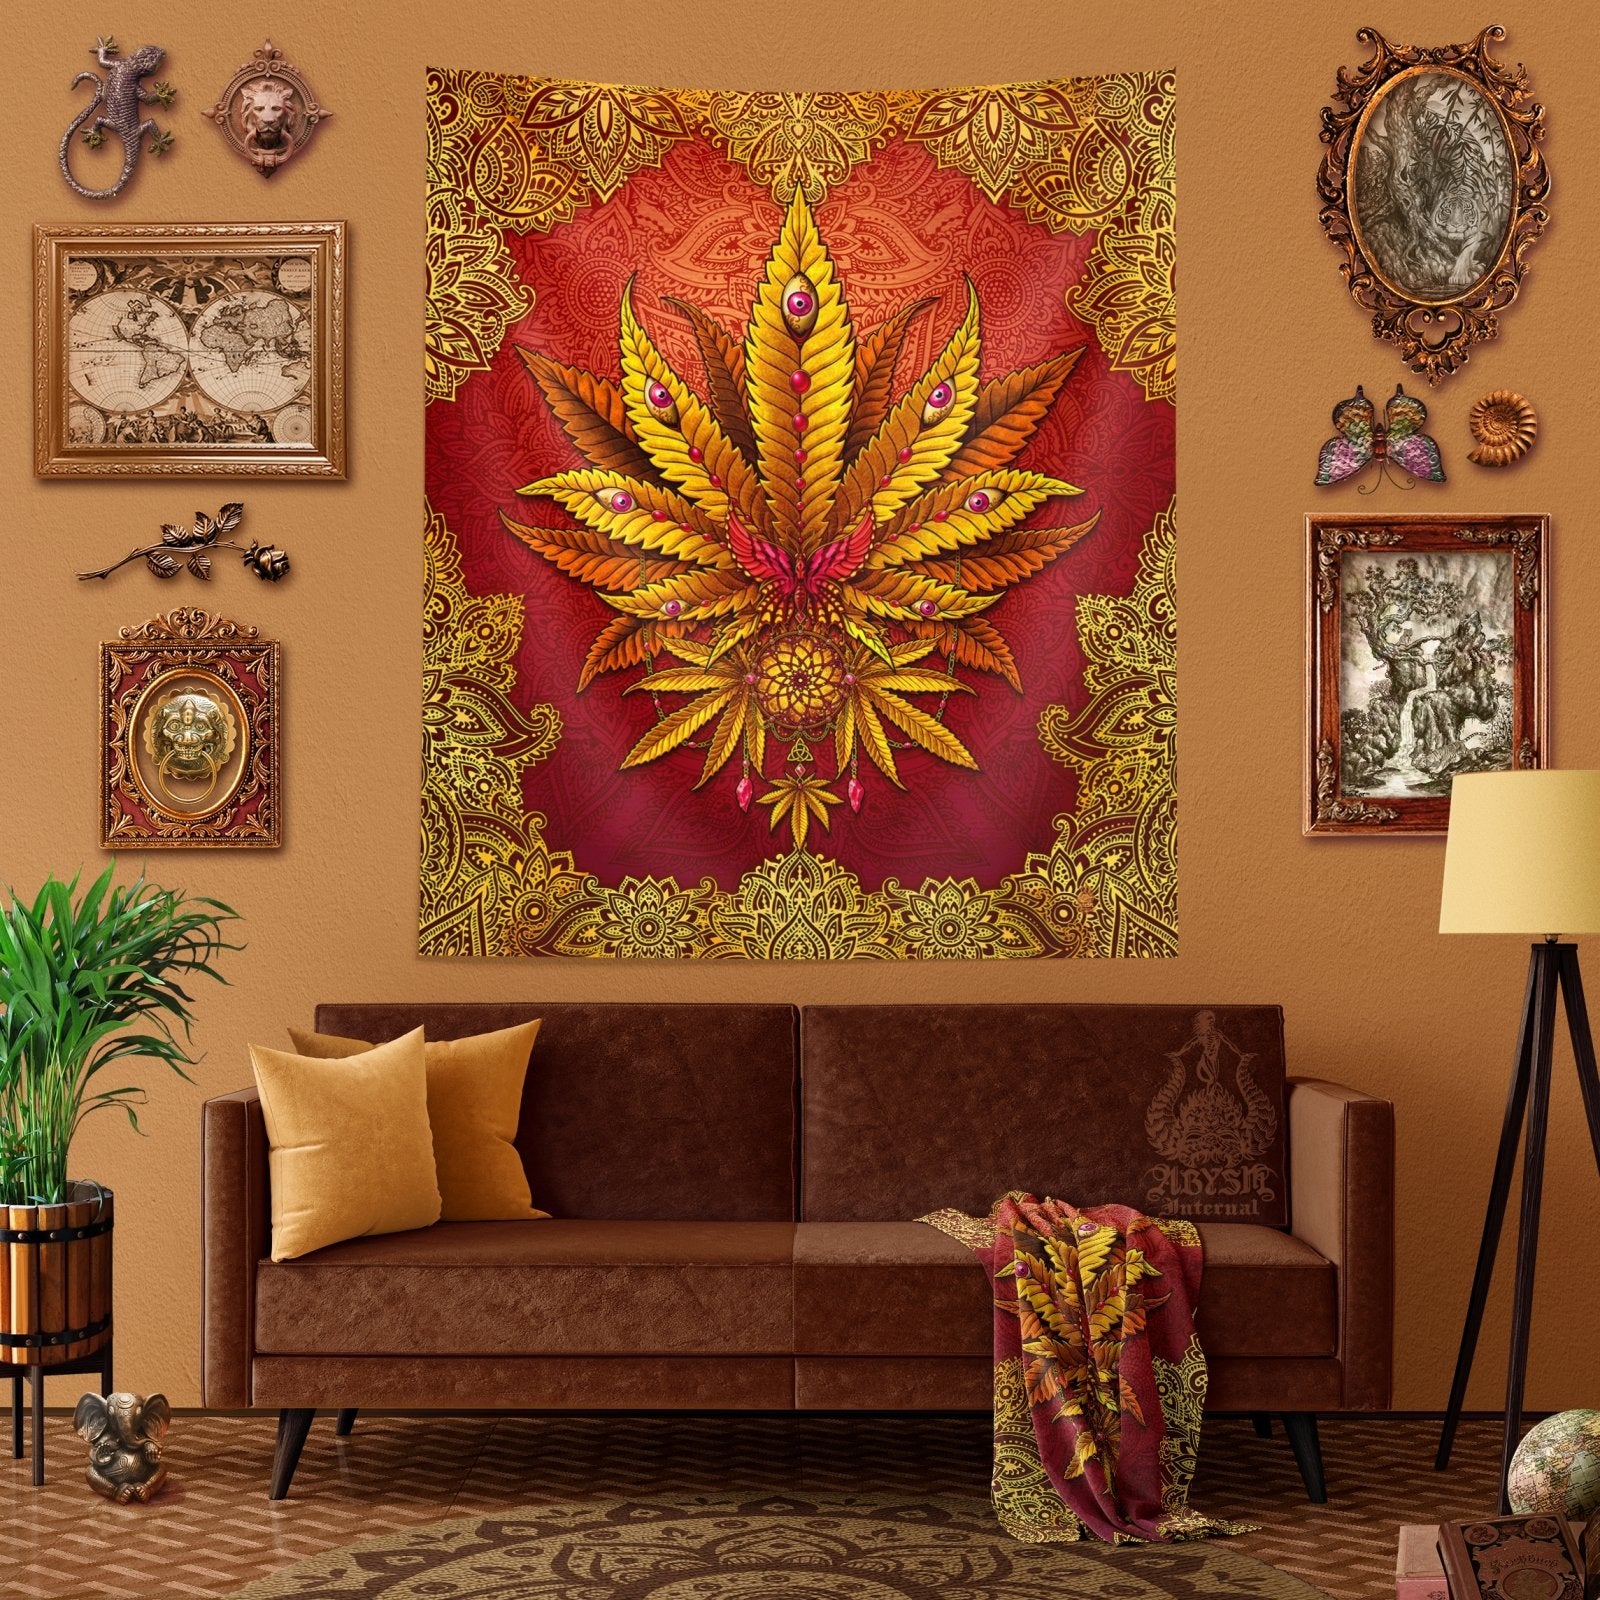 Boho Weed Tapestry, Hippie Cannabis Shop Decor, Wall Hanging, Bohemian Home Decor, Indie Art Print, 420 Gift, Eclectic and Funky Marijuana - Mandalas - Abysm Internal